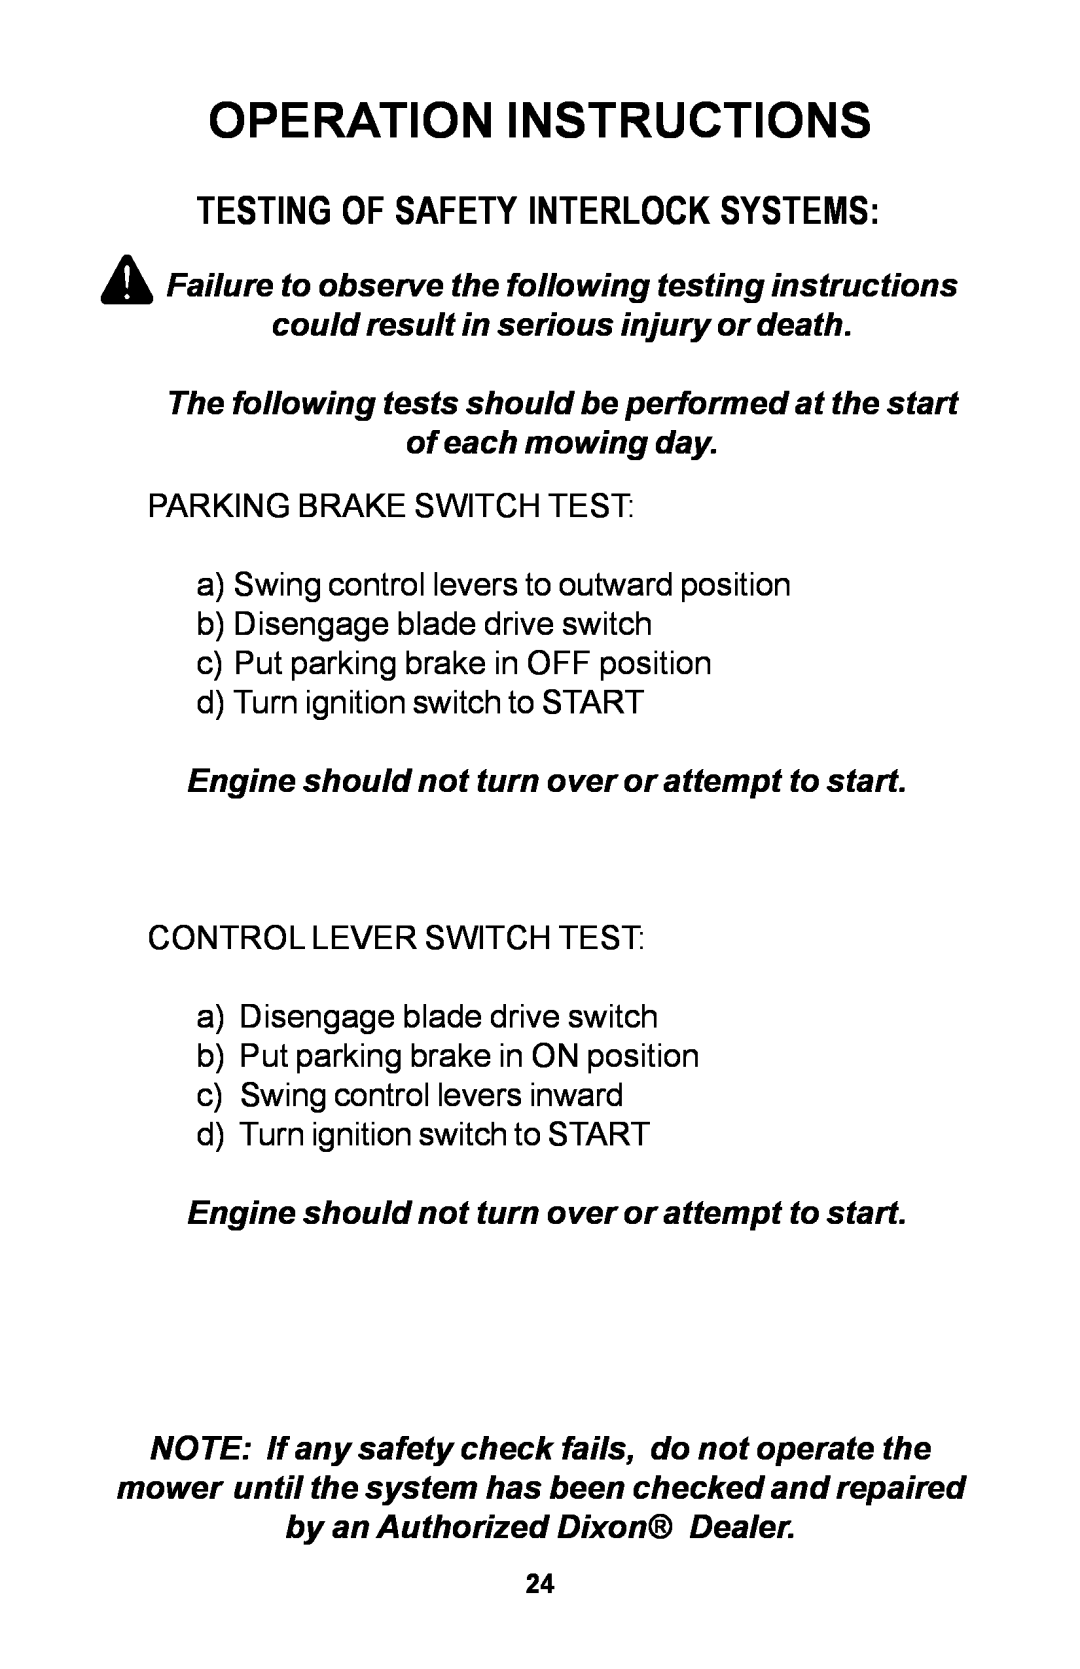 Dixon ZTR manual Testing Of Safety Interlock Systems, Operation Instructions 